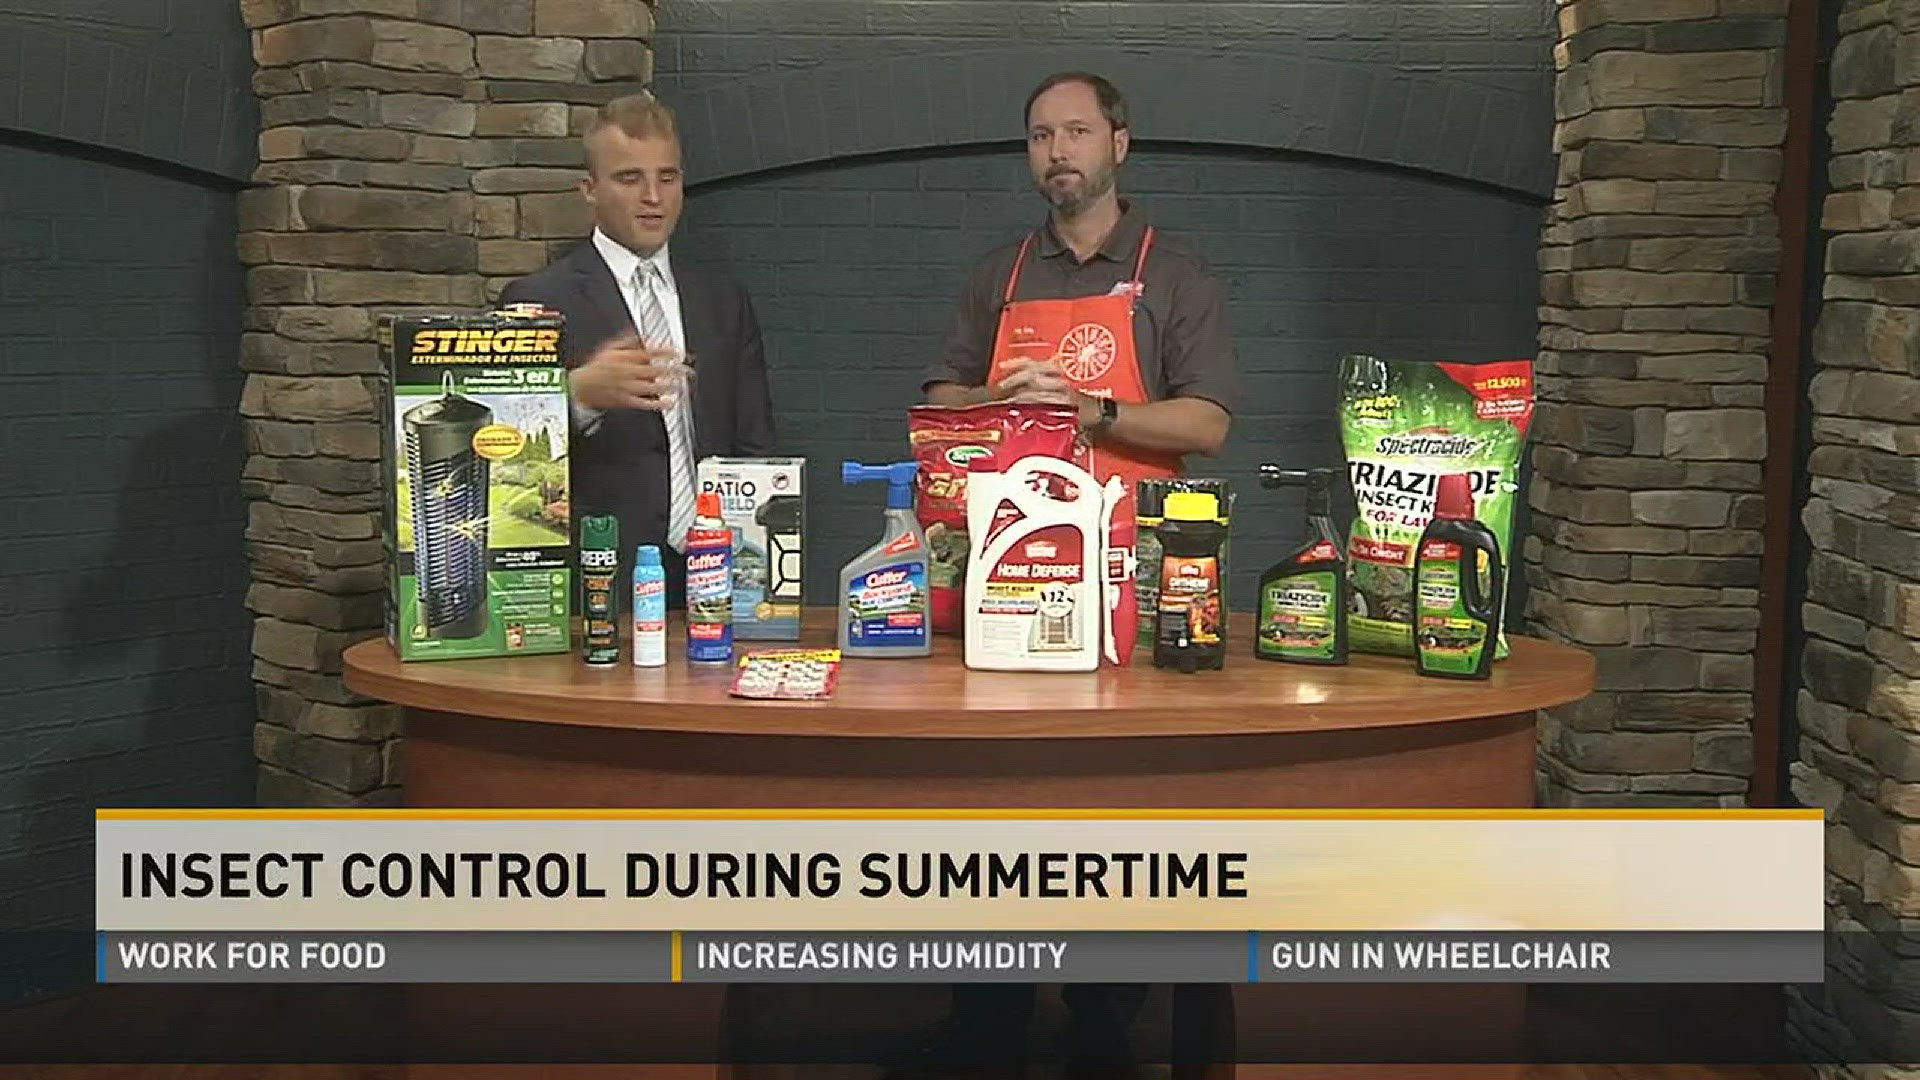 Scott from Home Depot shows us the many ways to control summertime pests